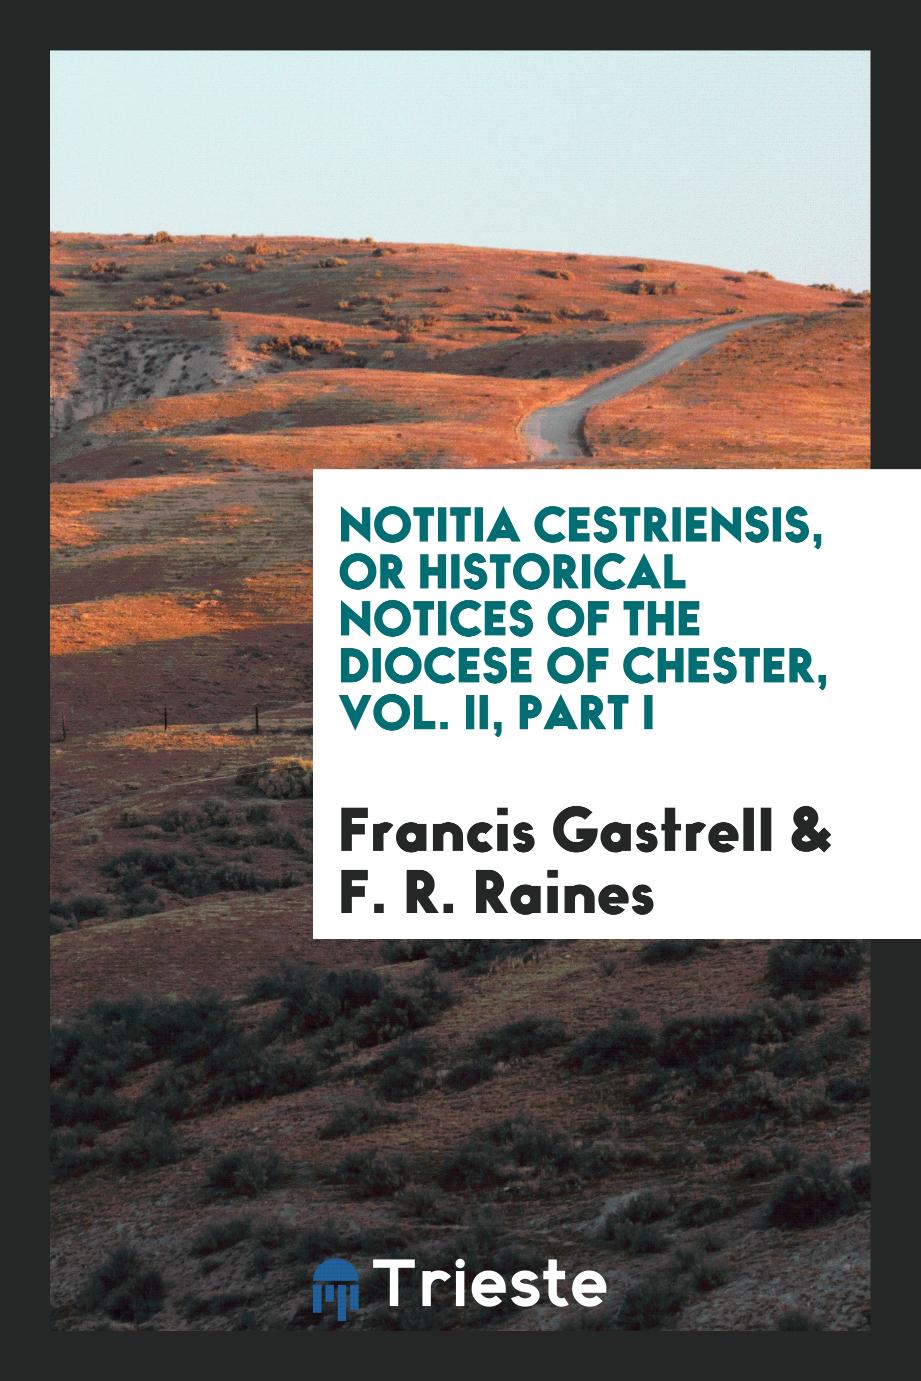 Notitia Cestriensis, or Historical Notices of the Diocese of Chester, Vol. II, Part I